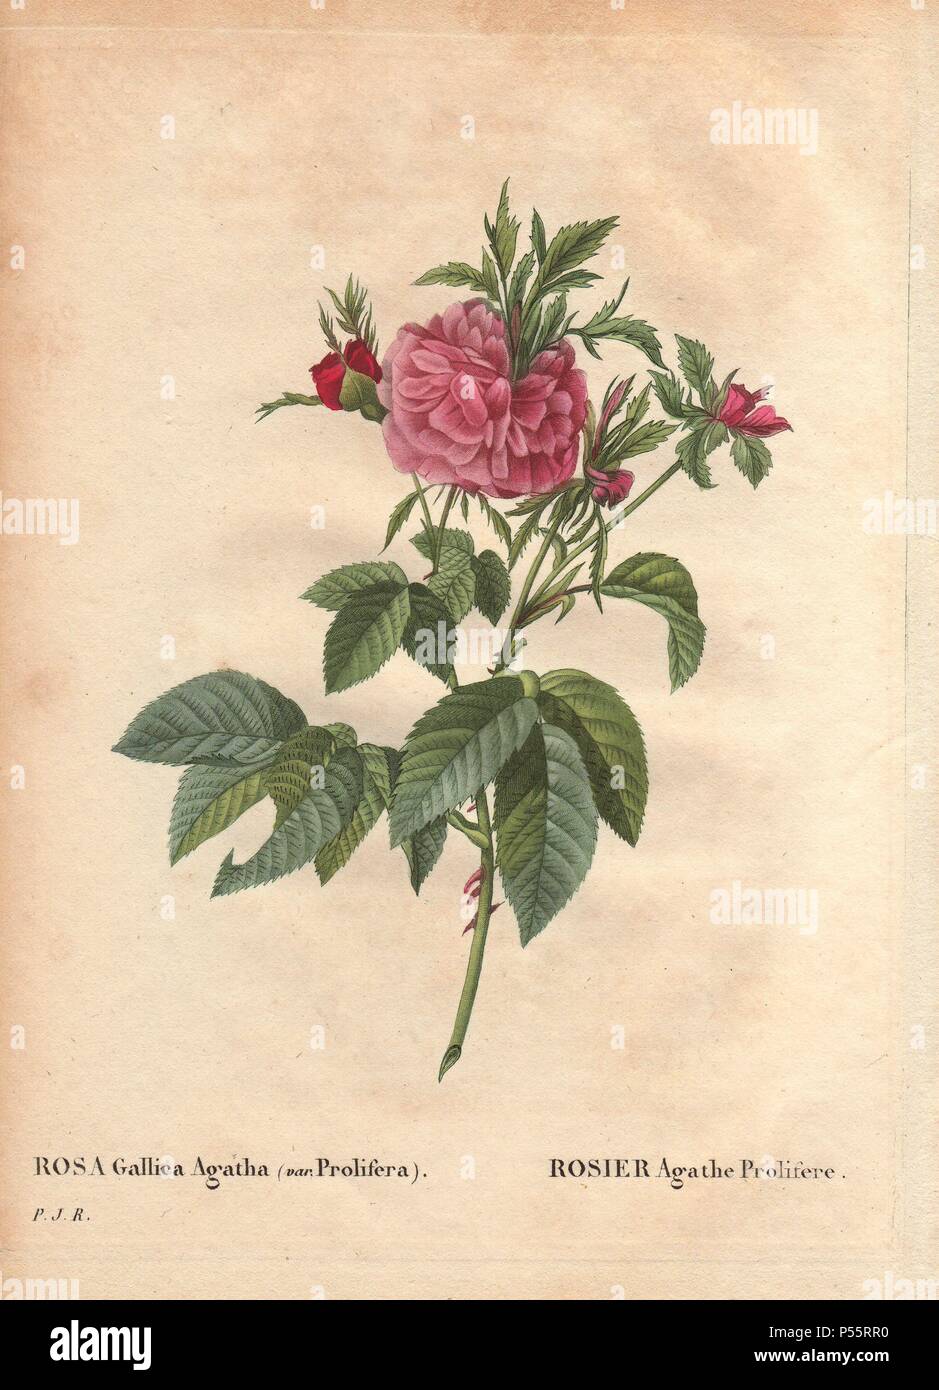 Rosa Gallica Agatha (var. Prolifera). . Rosier Agathe Prolifère. . Hand-colored, octavo-size stipple copperplate engraving from Pierre Joseph Redoute's 'Les Roses' 1828. Stock Photo